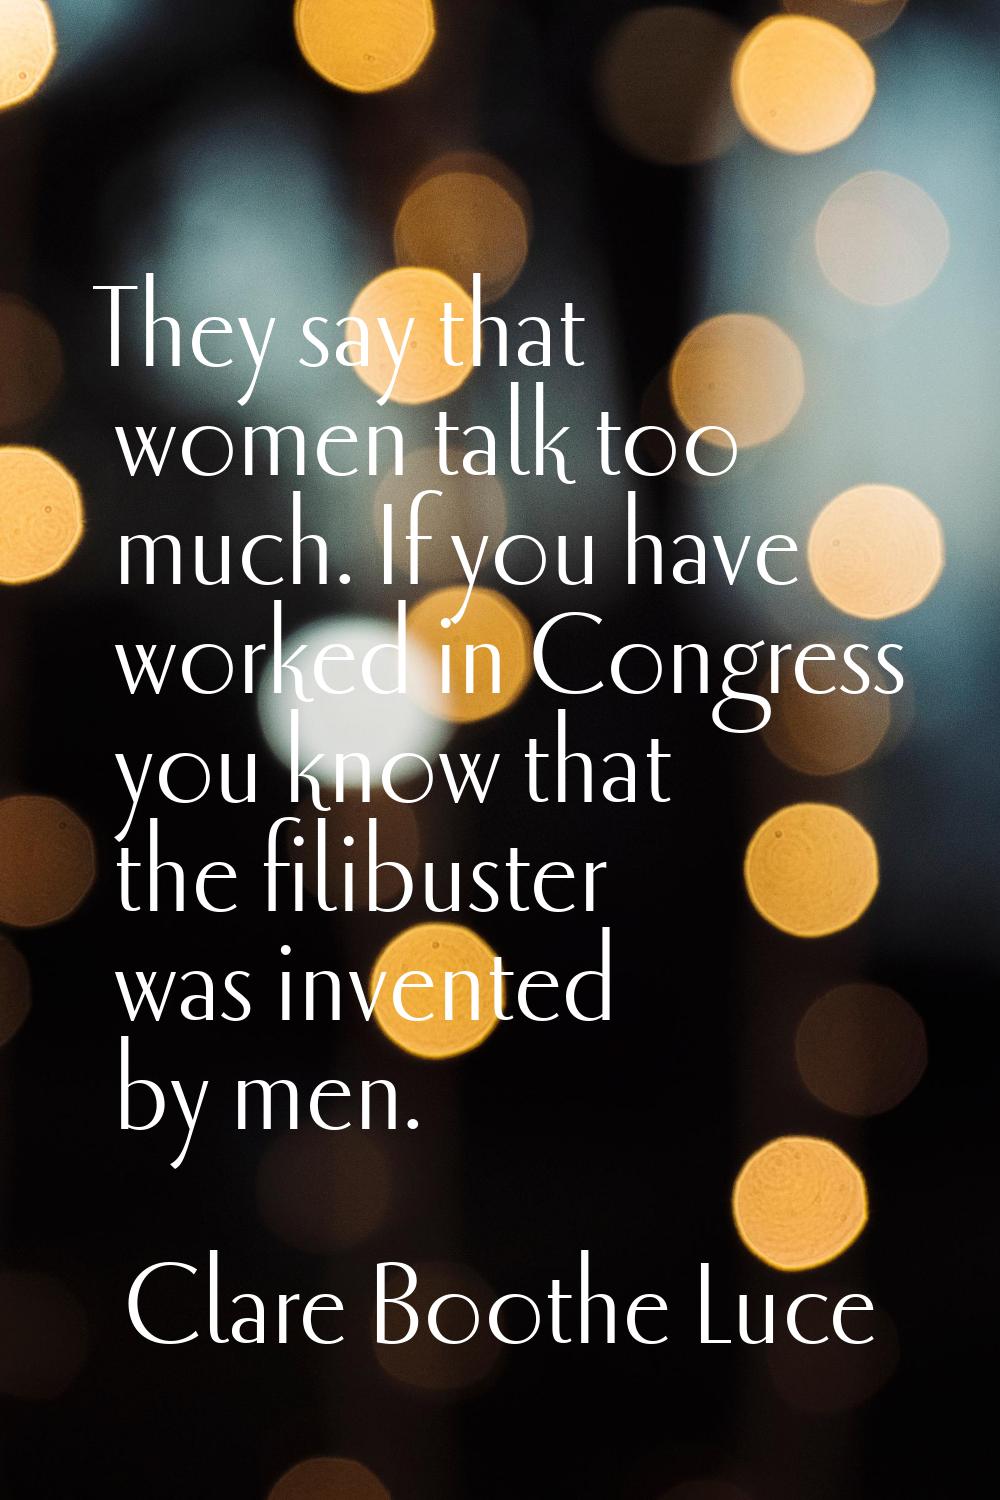 They say that women talk too much. If you have worked in Congress you know that the filibuster was 